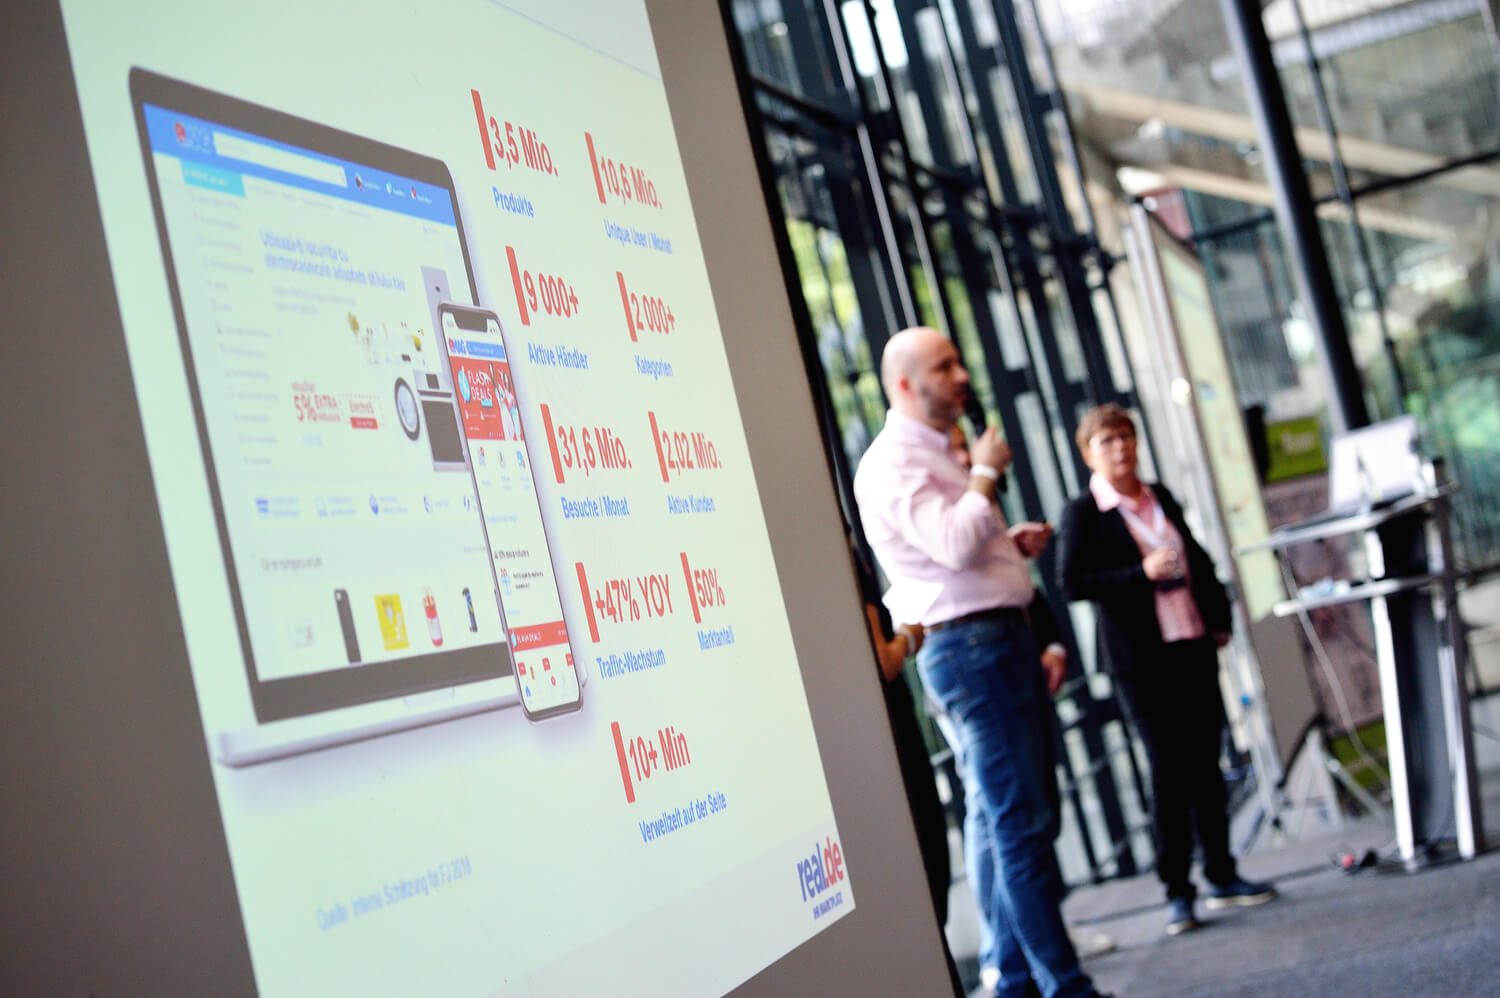 Foto: e-Commerce Day / real,- Digital Payment & Technology Services GmbH